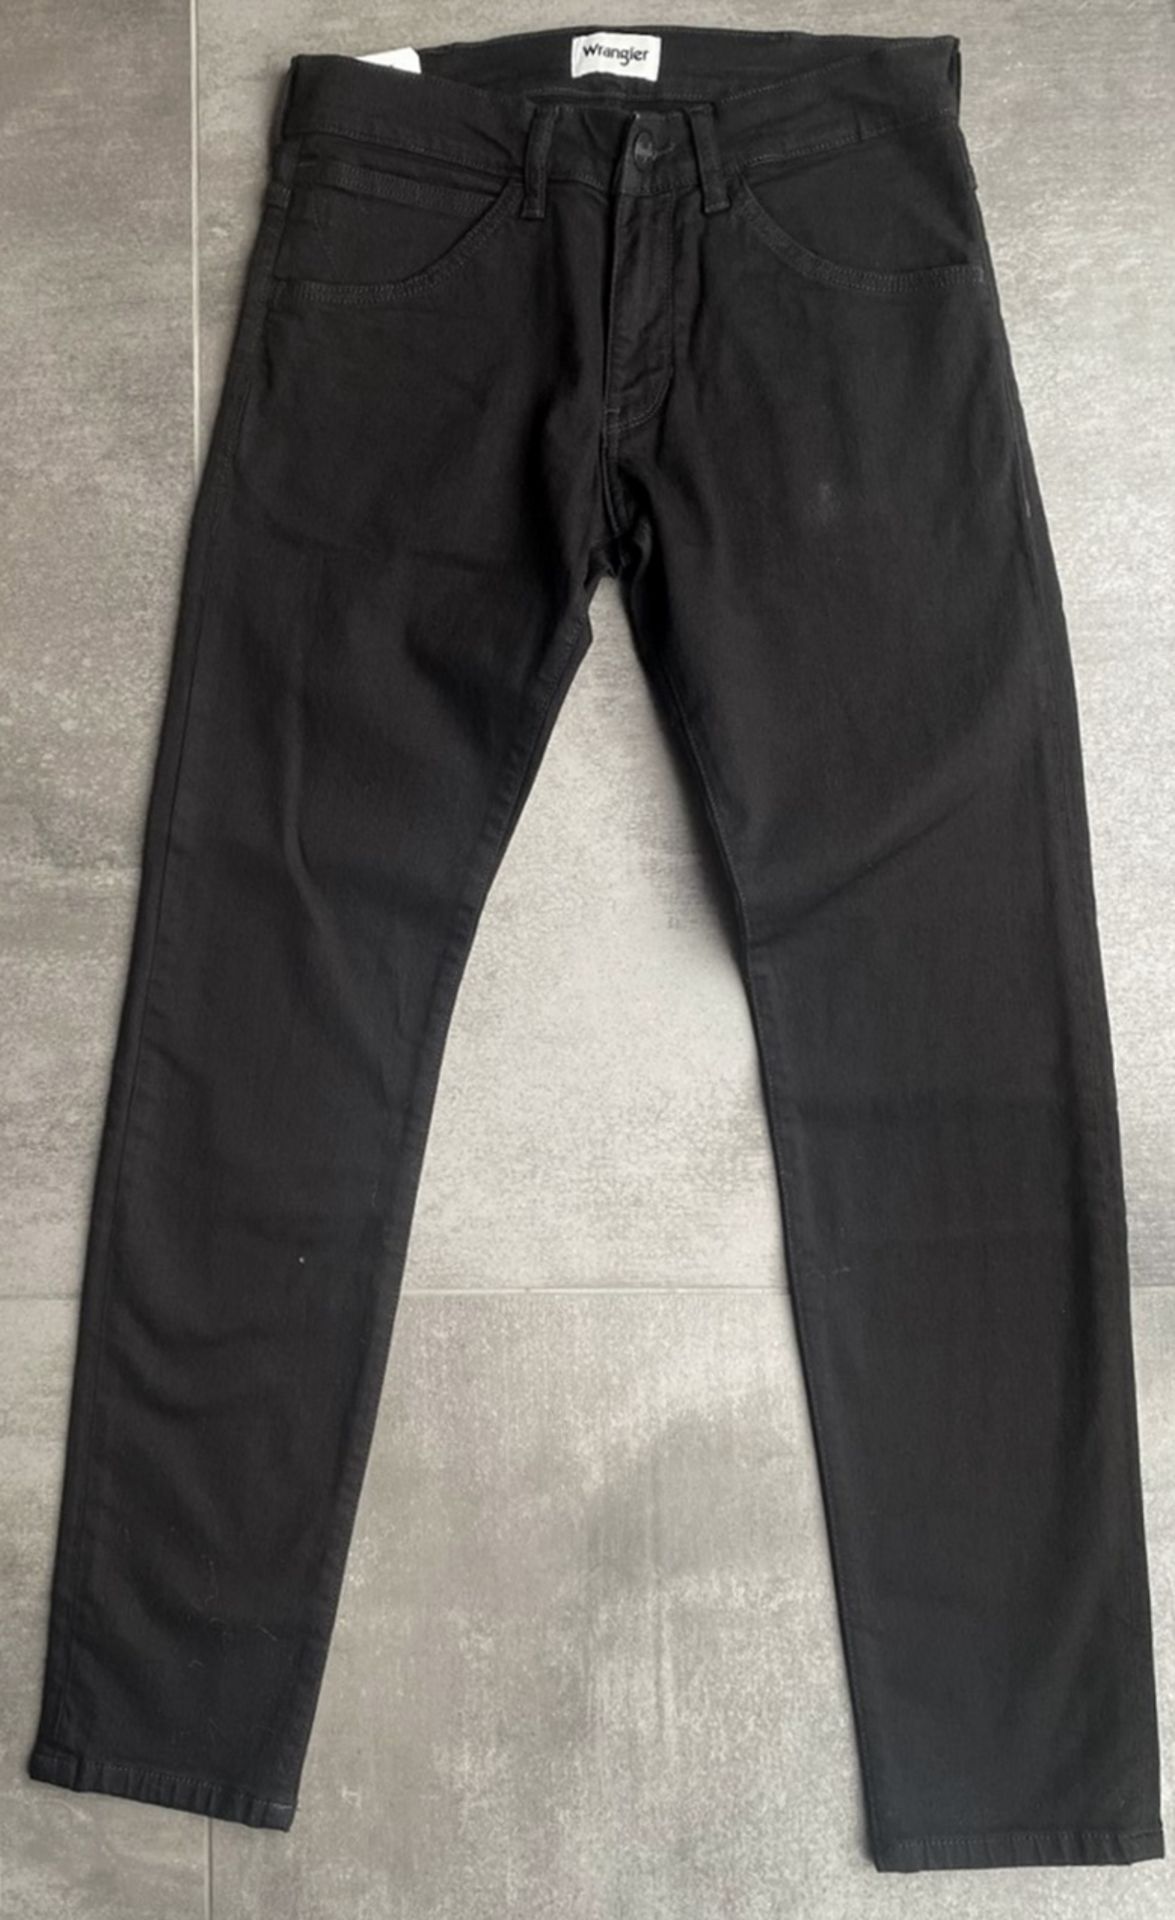 1 x Pair Of Men's Genuine Wrangler Jeans In Black - Size: 30/32 - Preowned, Like New With Tags - - Image 5 of 10